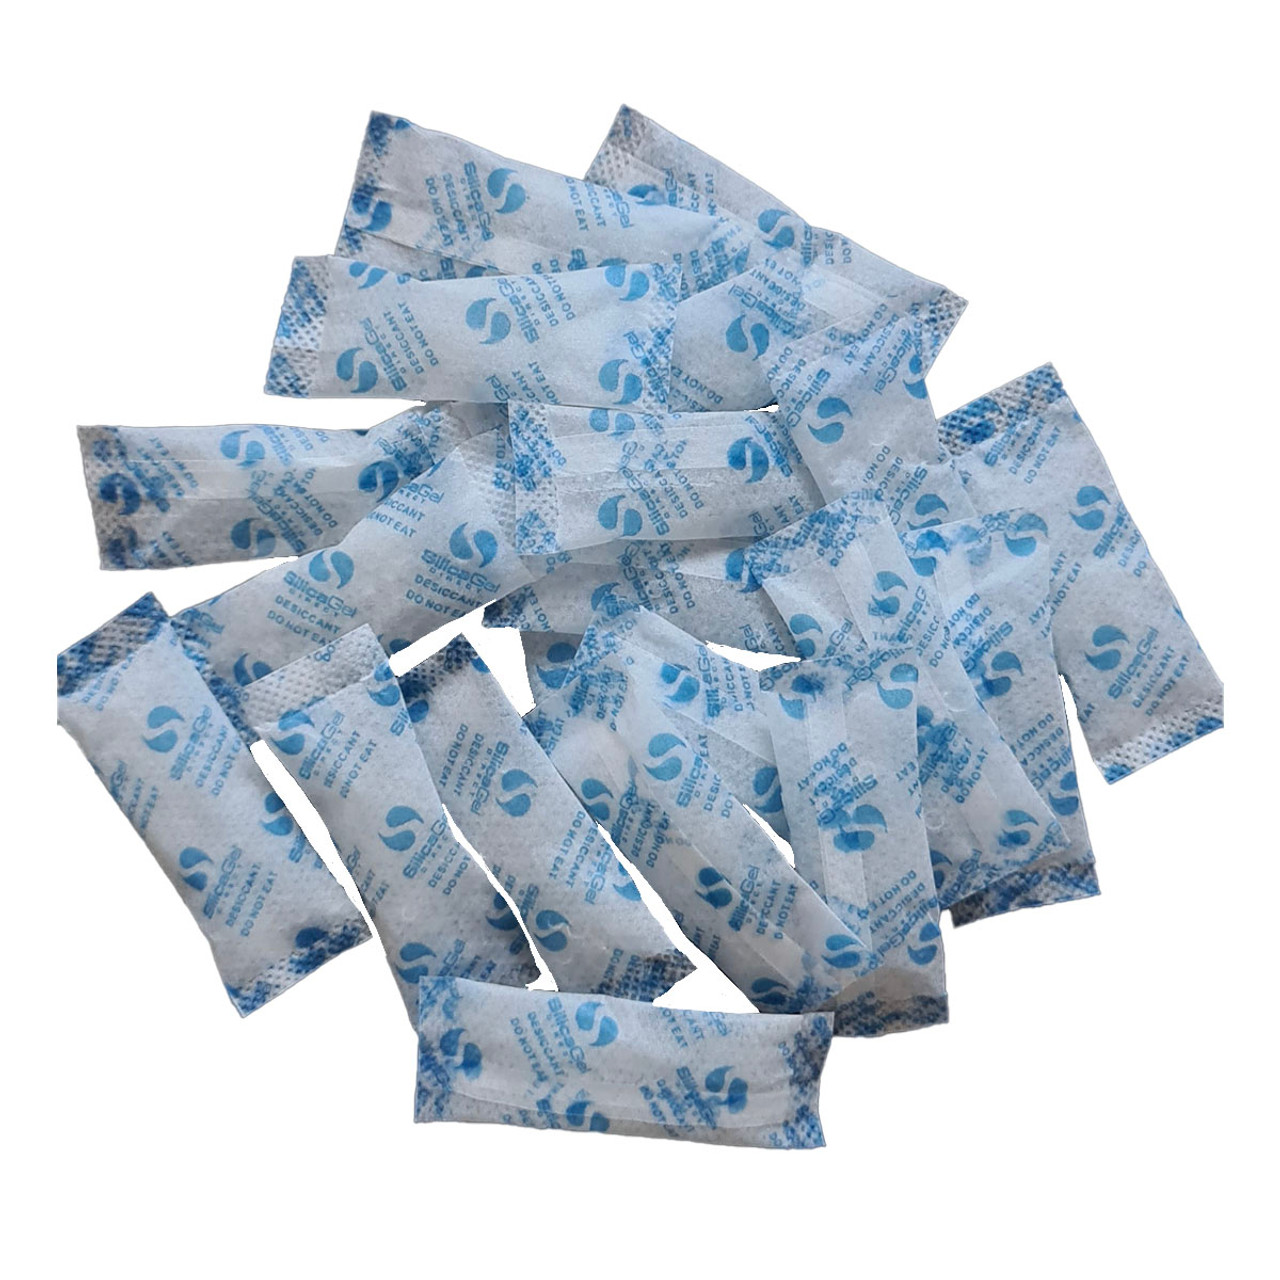 2gm Silica Gel Moisture Absorber Aiwa Paper Desiccant Packets - Silica Bags